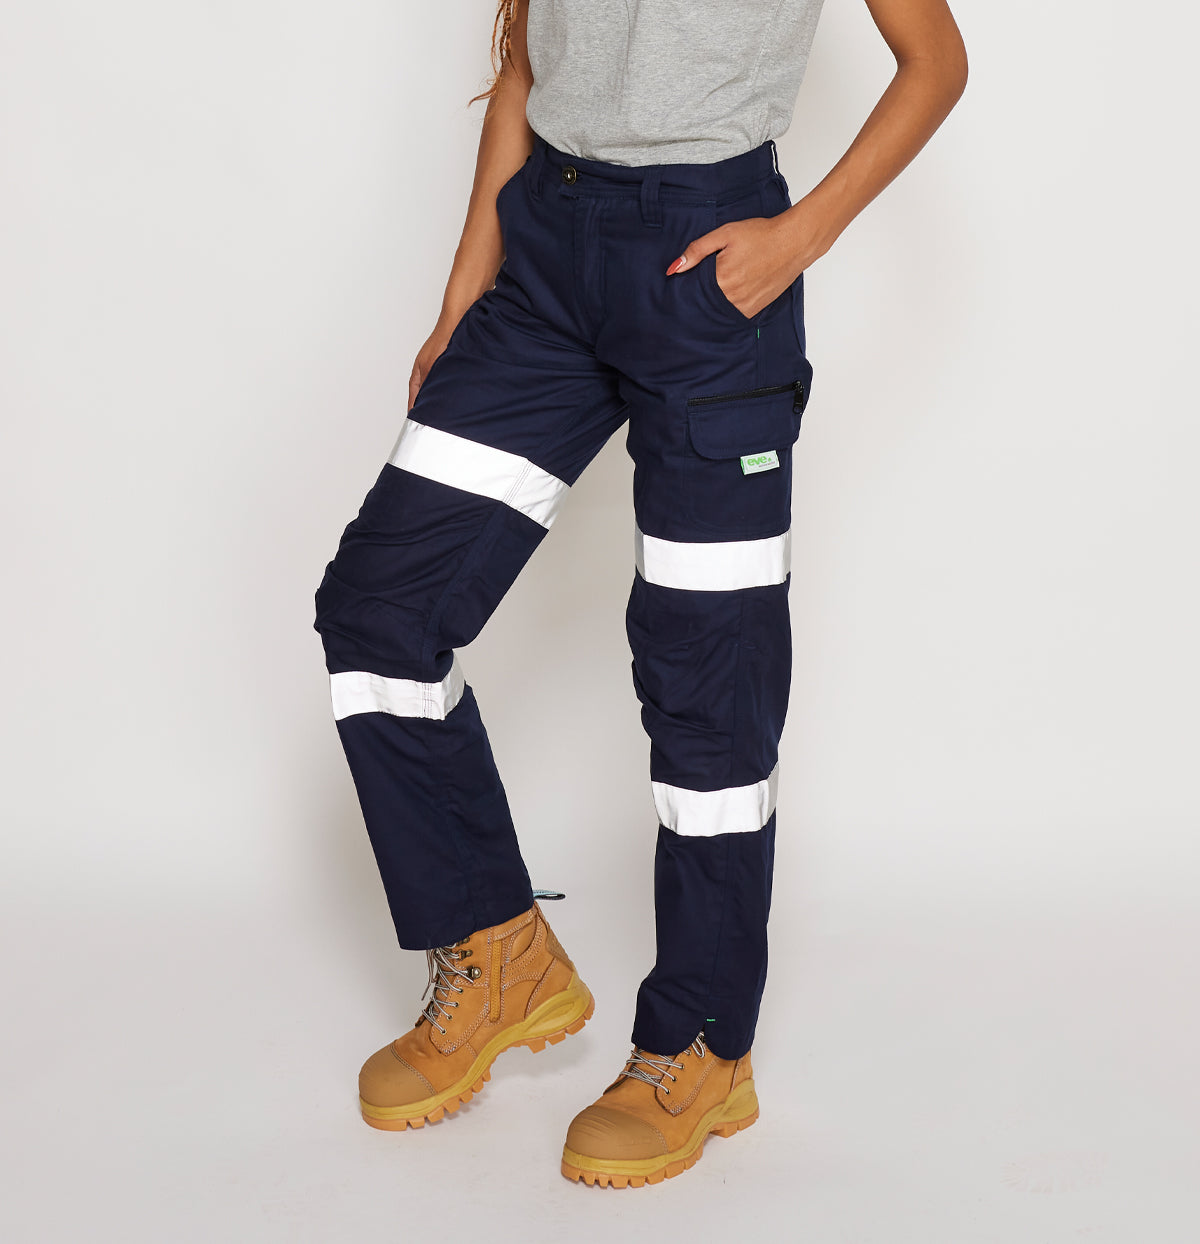 Utility Work Pants - Intuition - High Visibility – eve workwear